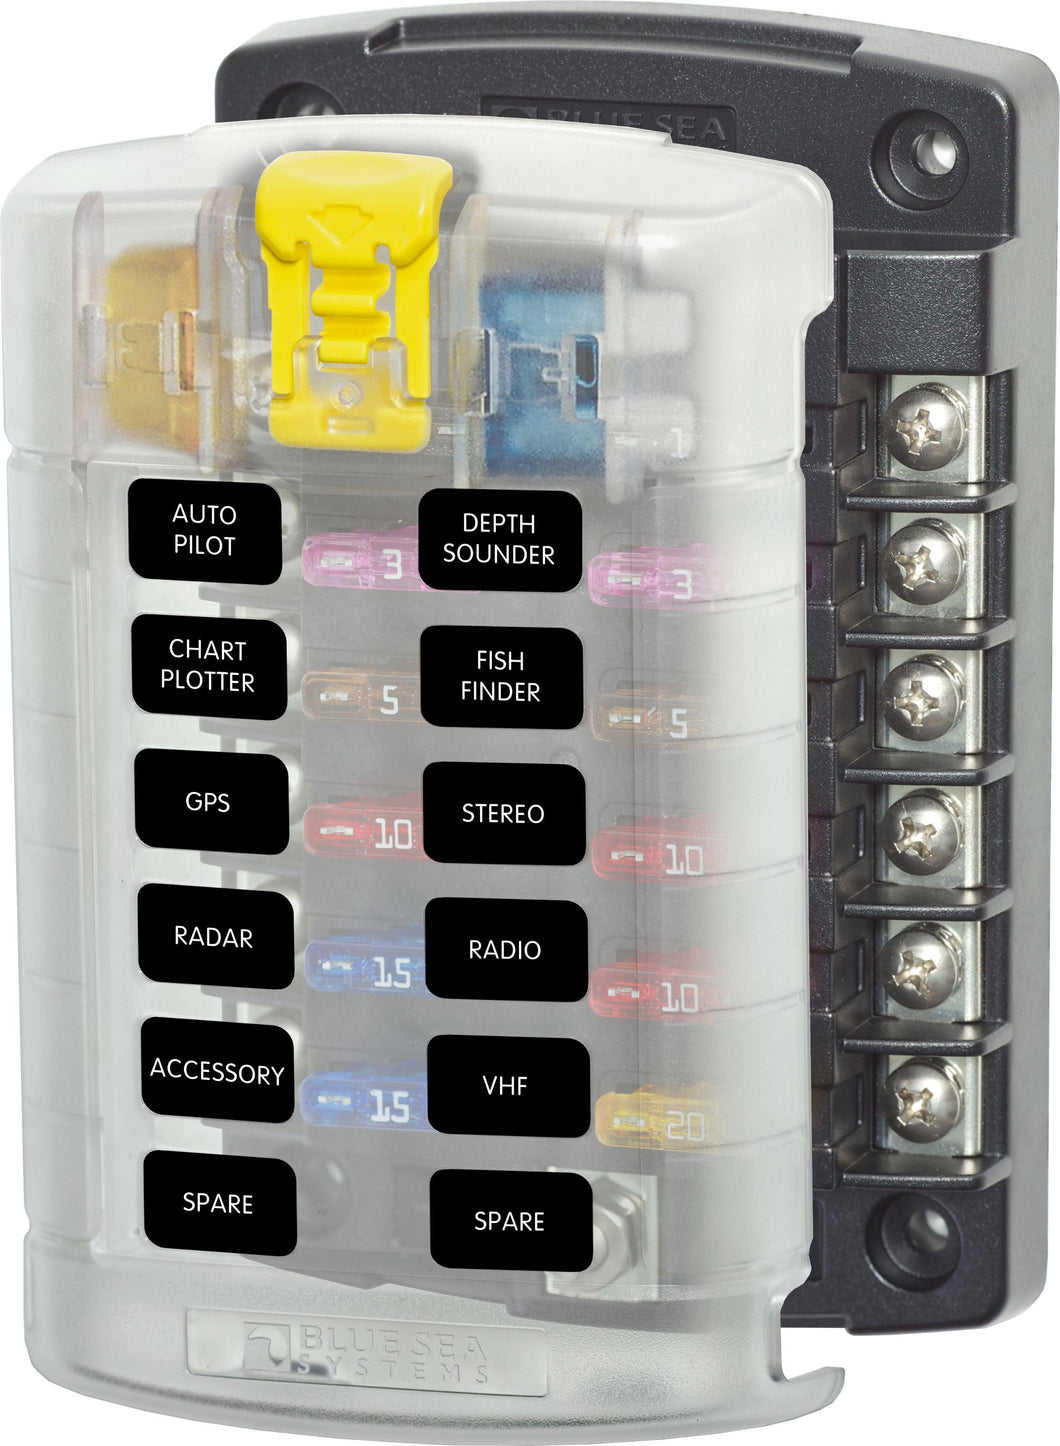 Blue Sea 5029 12-gang Fuse Block St Ato-atc With Cover